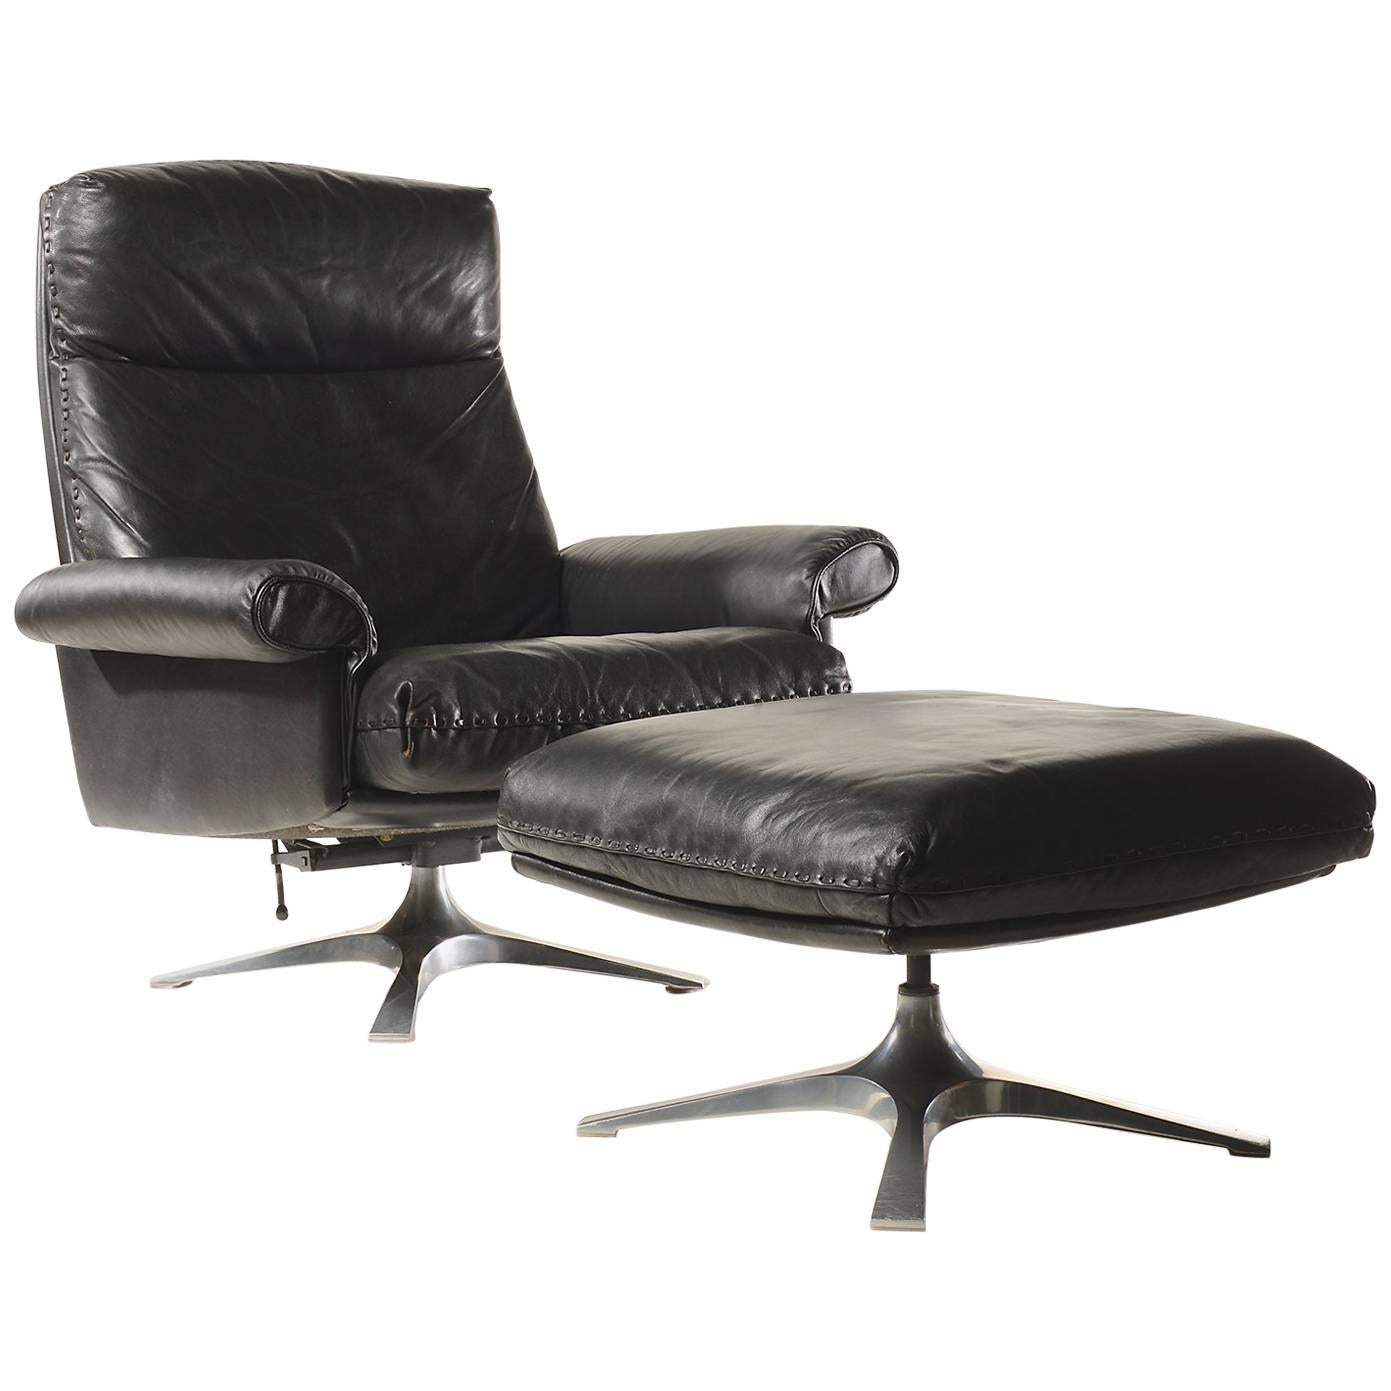 Midcentury De Sede DS 31 High-Back Swivel Lounge Armchair with Ottoman, 1970